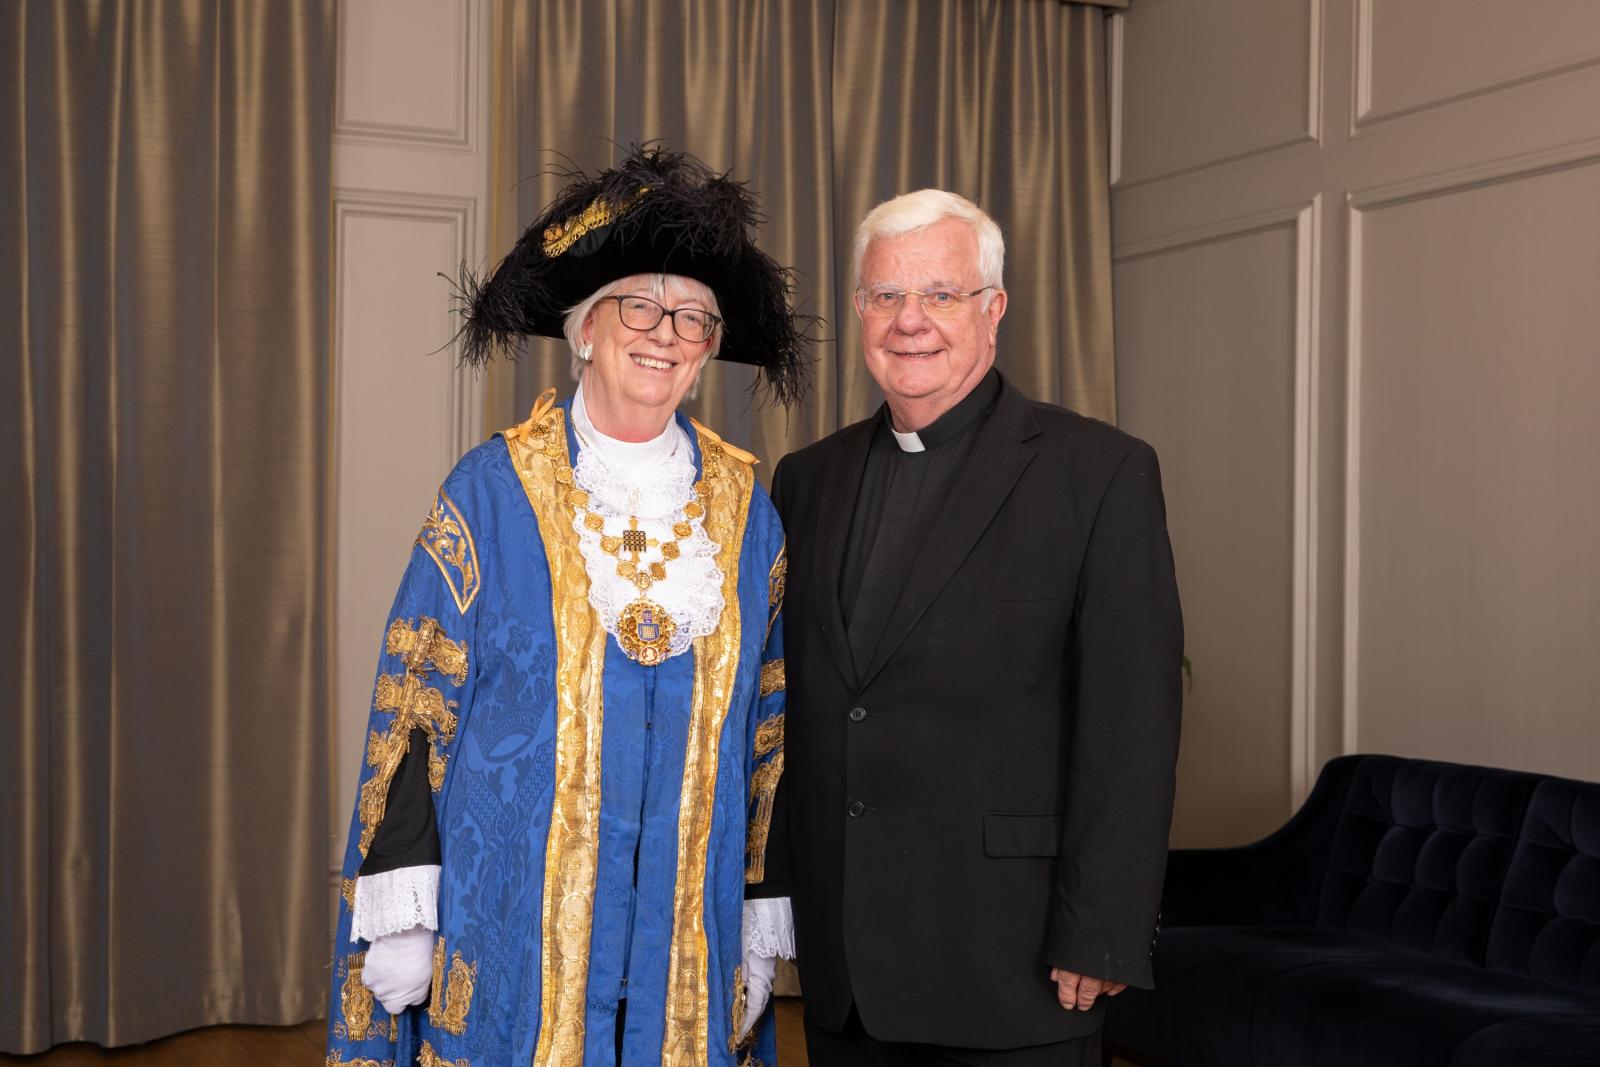 Celebrating the new Lord Mayor of Westminster - Diocese of Westminster